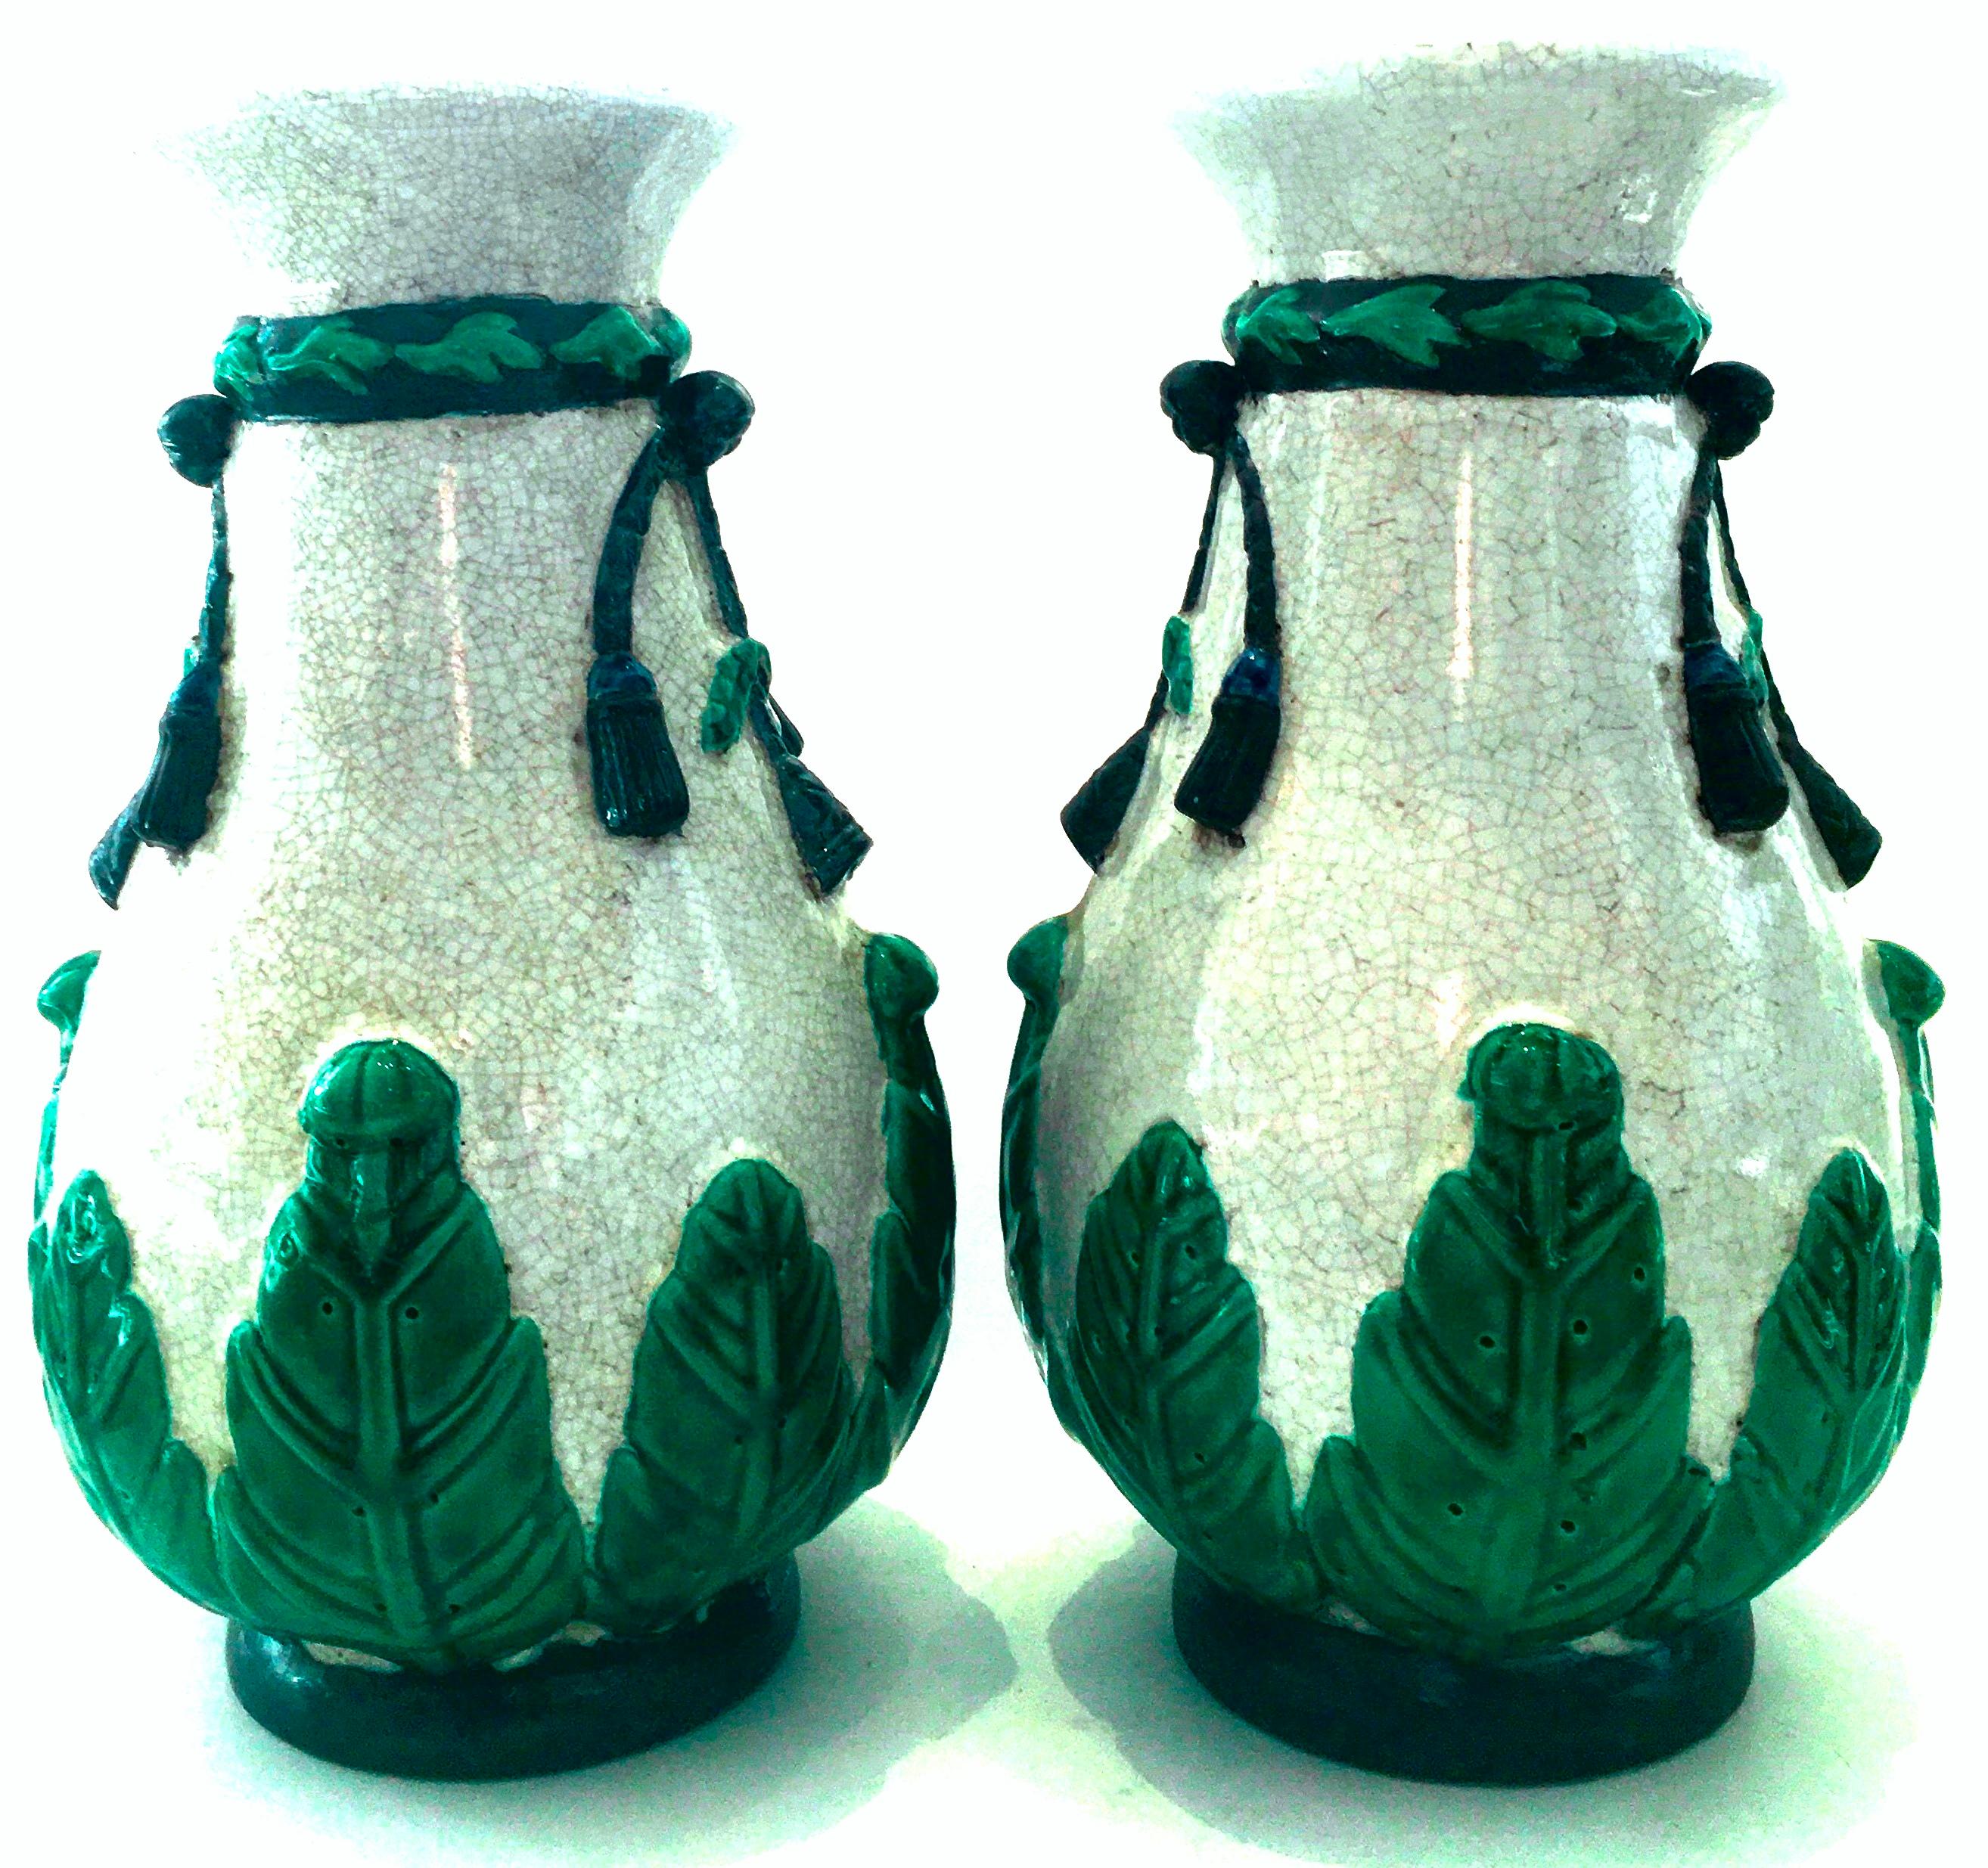 20th century pair of hand crafted Chinese export crackle Majolica style vases-Signed. This unique pair of porcelain crackle vases feature applied and raised detail in the Majolica style. Hand painted glaze Tones of vivid green, brown and blue over